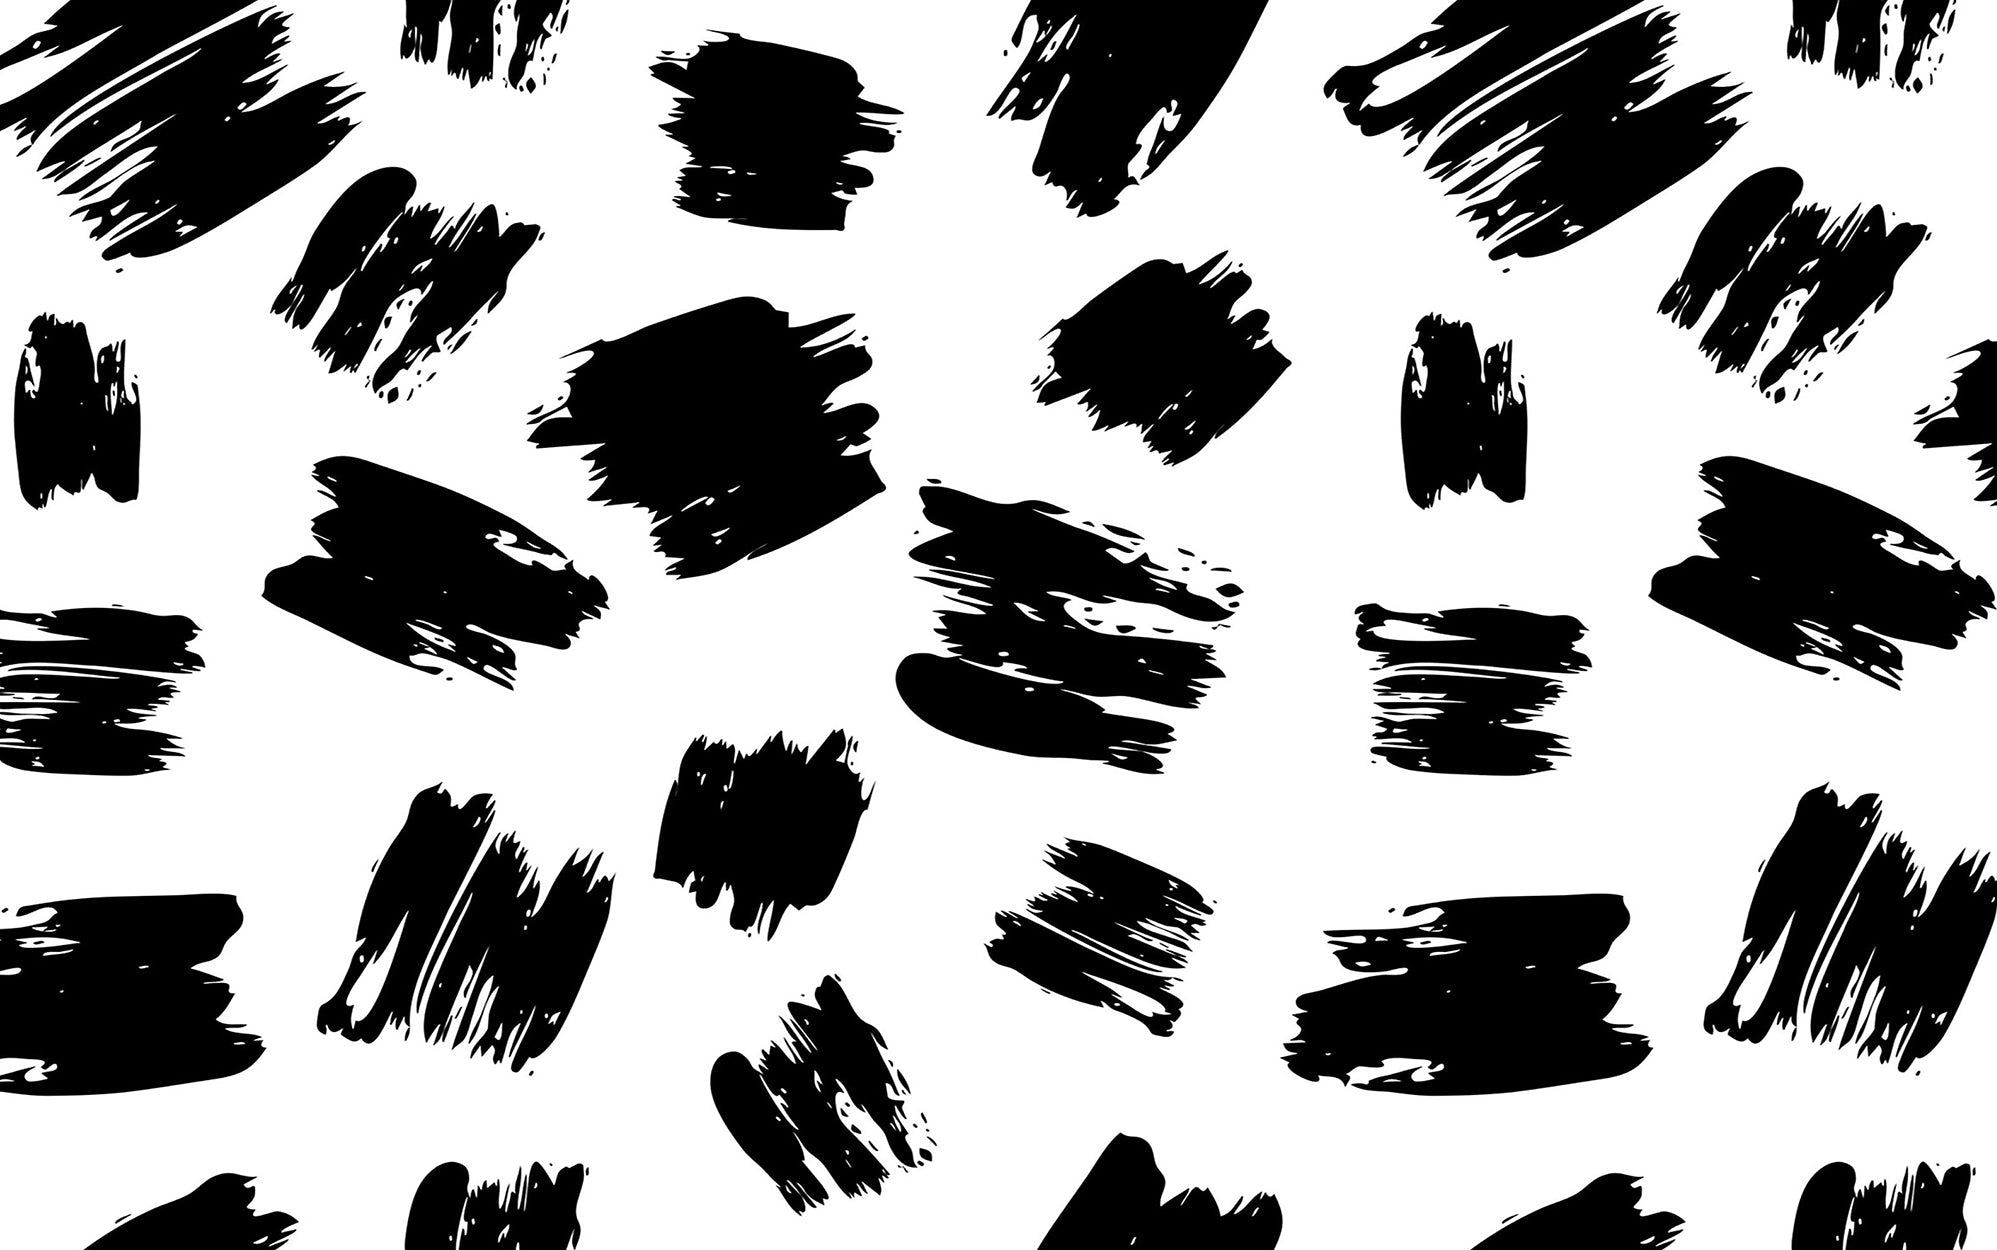 Abstract black brushstrokes pattern wall mural in a monochrome design